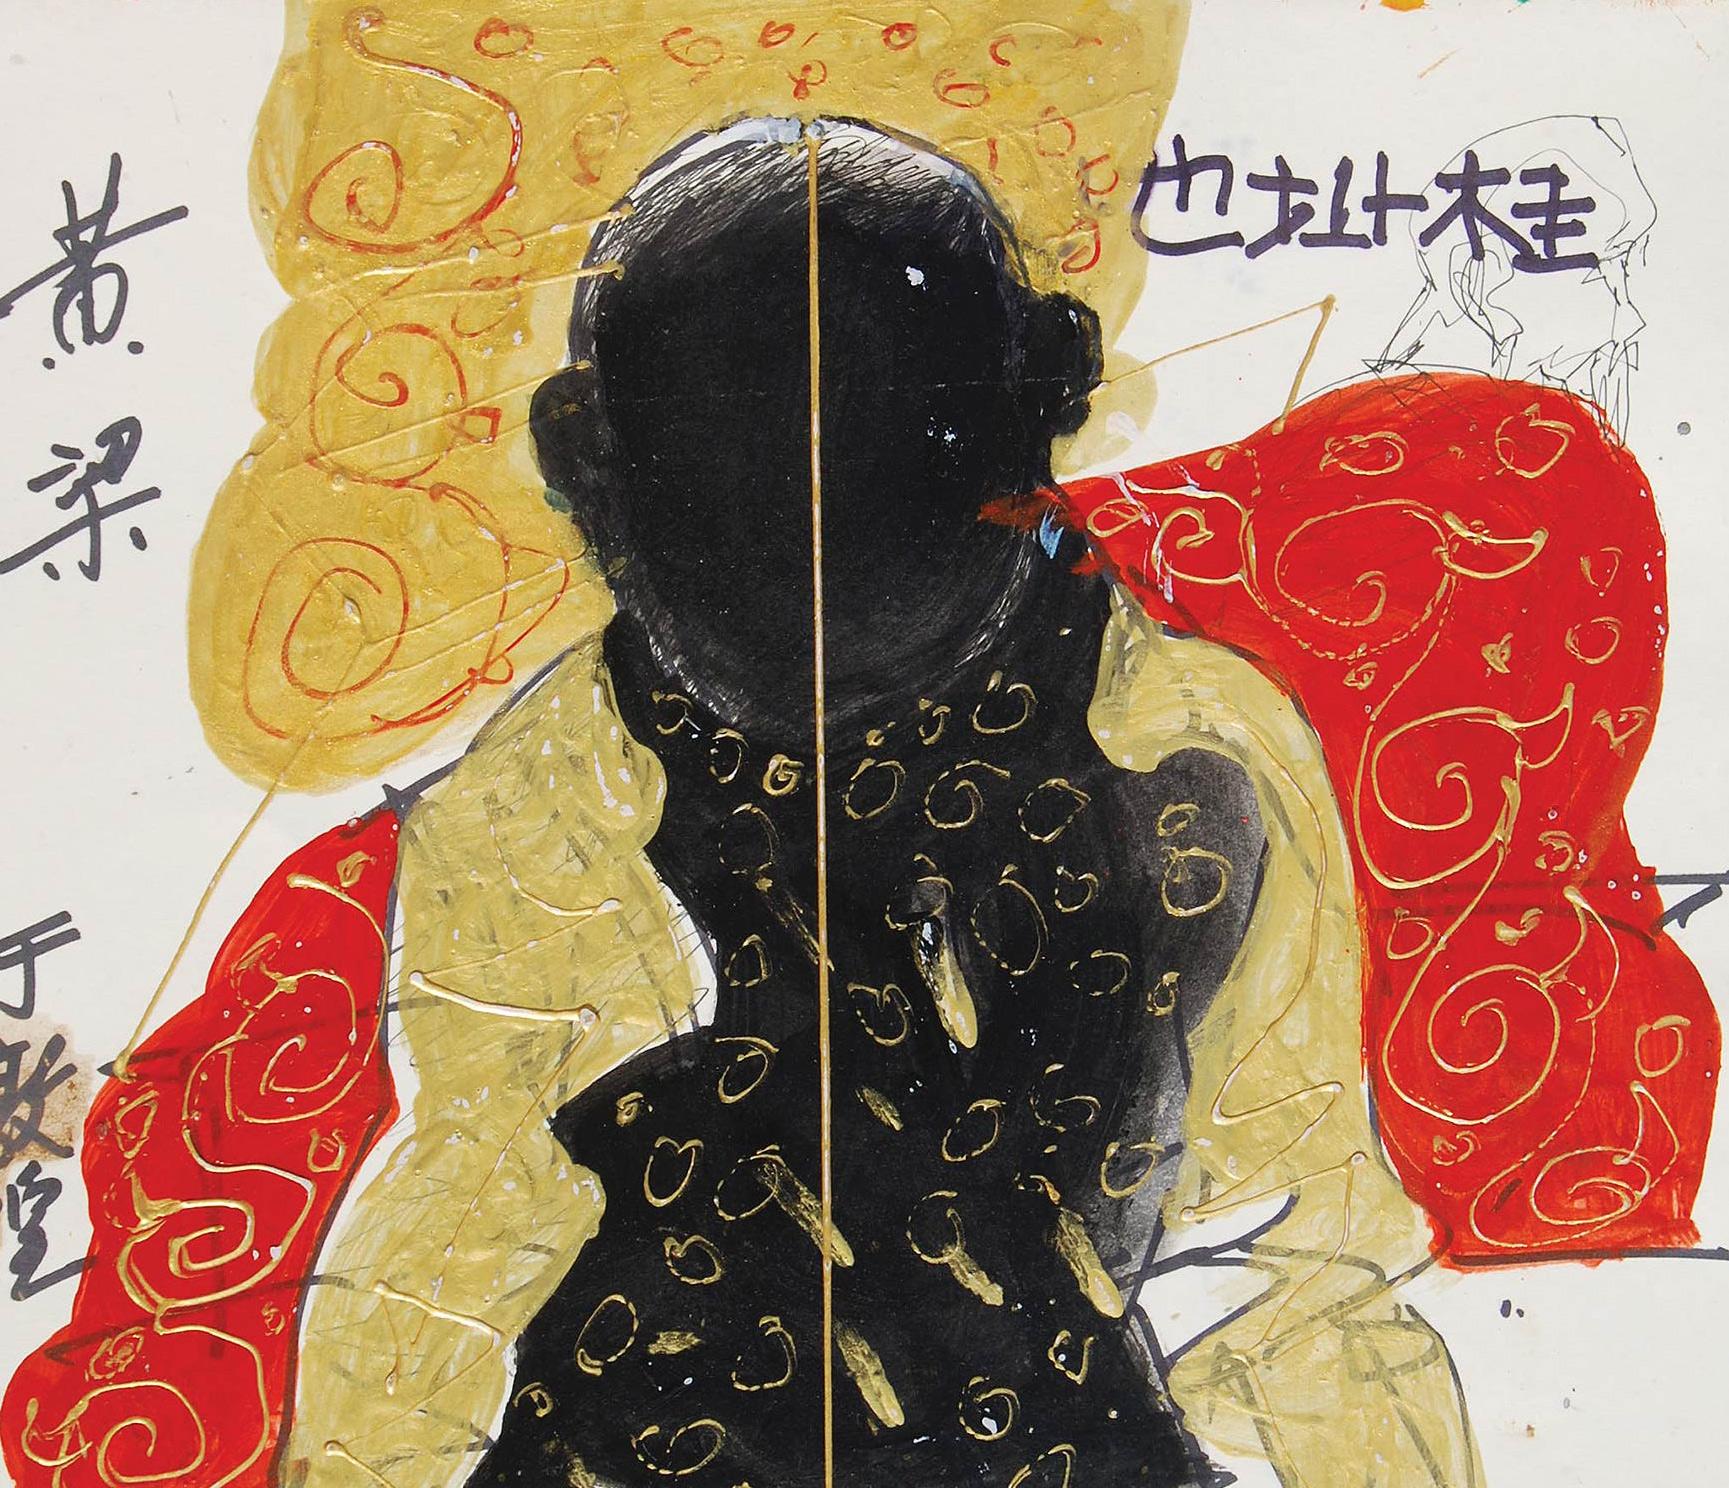 Chinese Man, Mixed Media on Paper, Red, Golden, Black by Master Artist